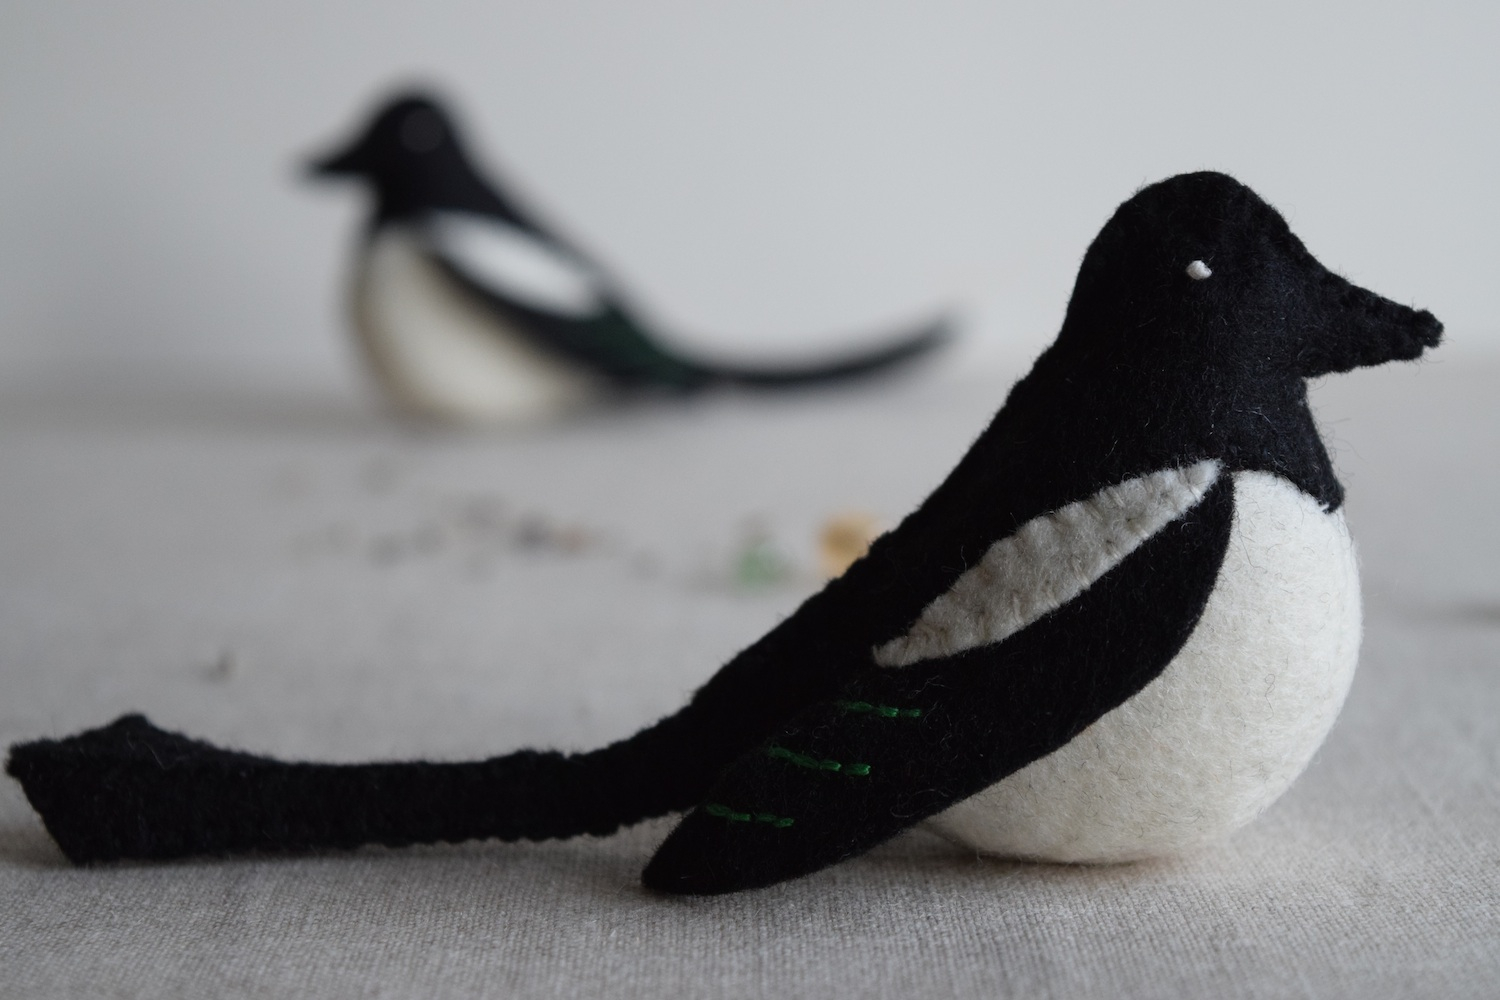 Embroidery Bird Patterns Rosa Mae Magpie Sewing Pattern Diy Embroidery Sewing Pattern For Bird Softie Magpie Soft Toy Tutorial